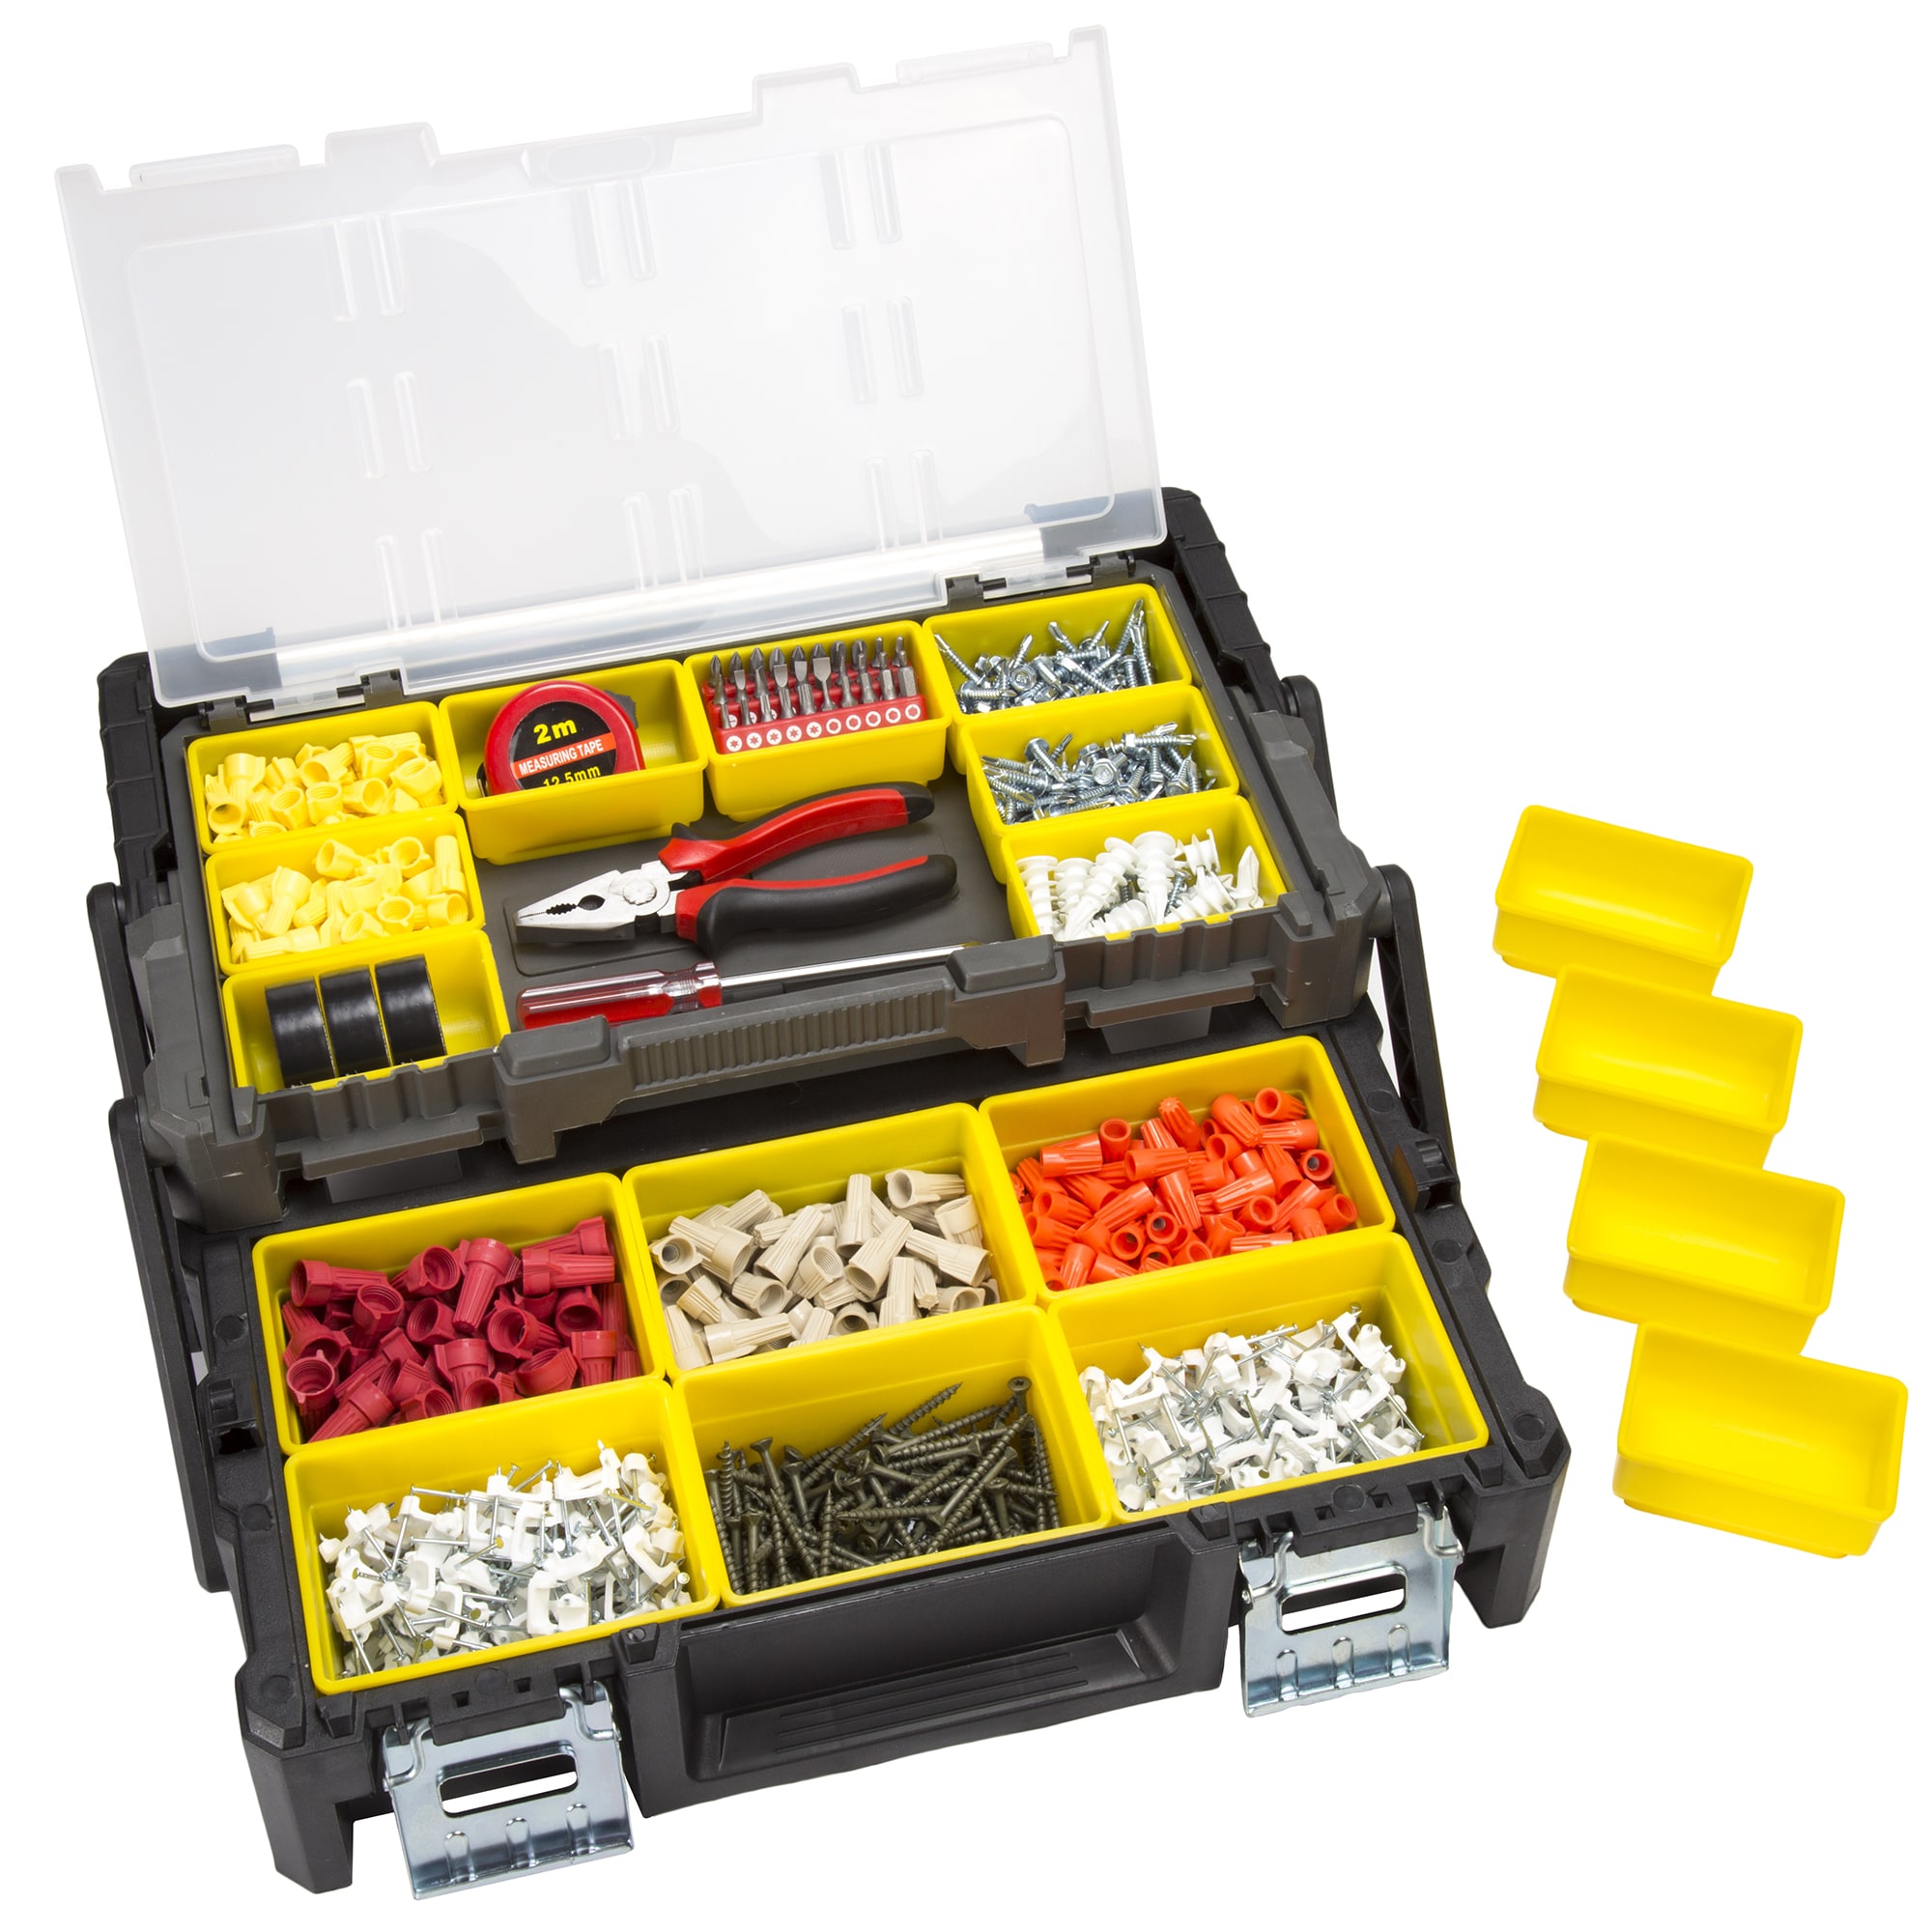 Stalwart Portable Tool Storage Box - Small Parts Organizer with 4